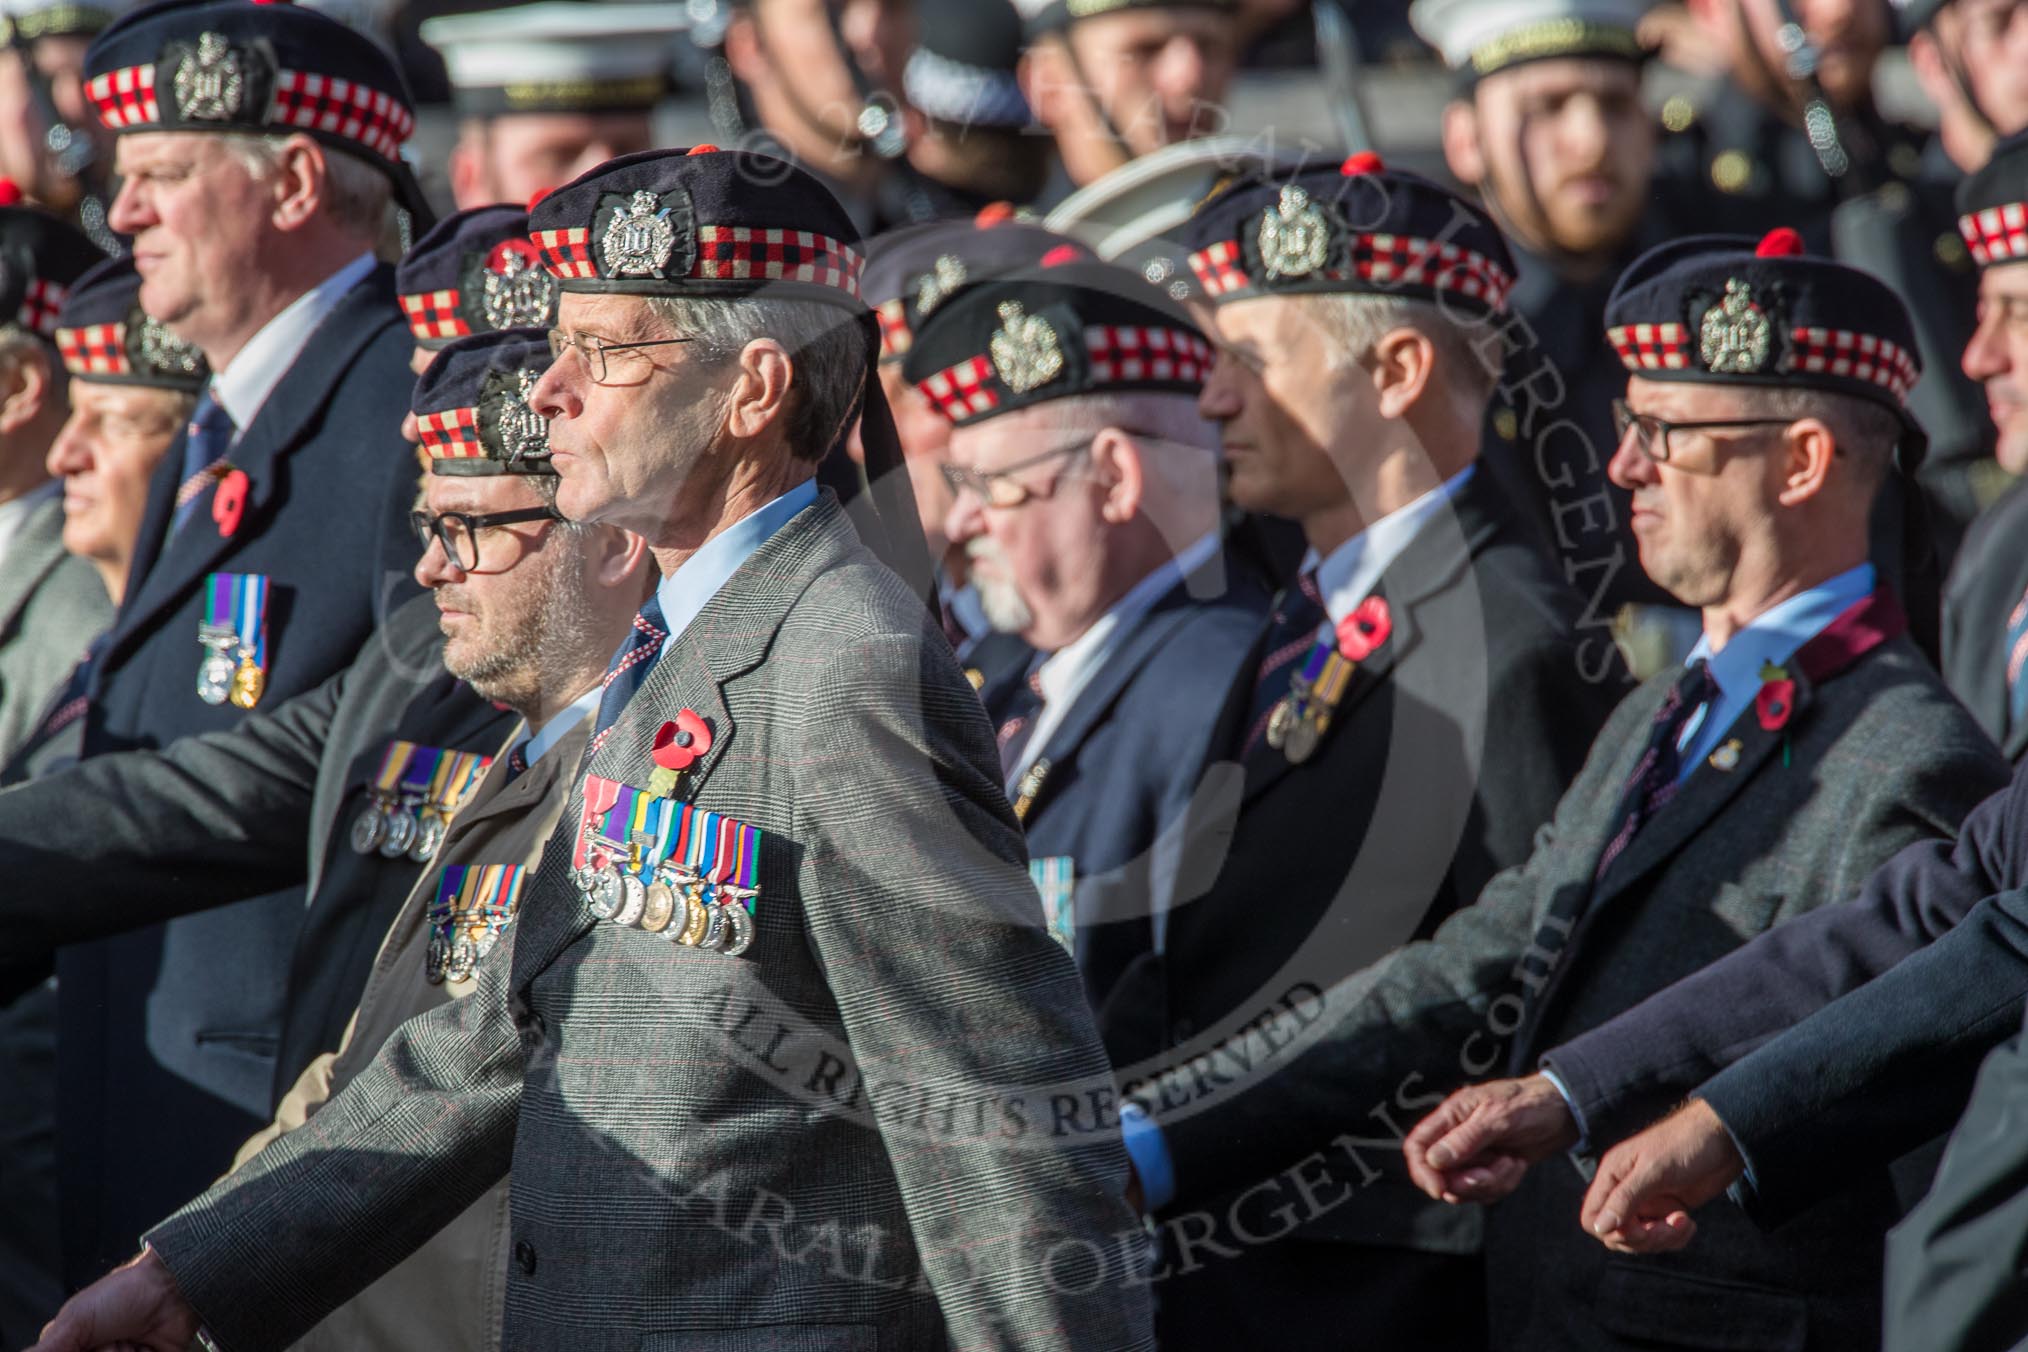 KOSB -The Kings Own Scottish Borderers Association (Group A9, 75 members) during the Royal British Legion March Past on Remembrance Sunday at the Cenotaph, Whitehall, Westminster, London, 11 November 2018, 11:57.